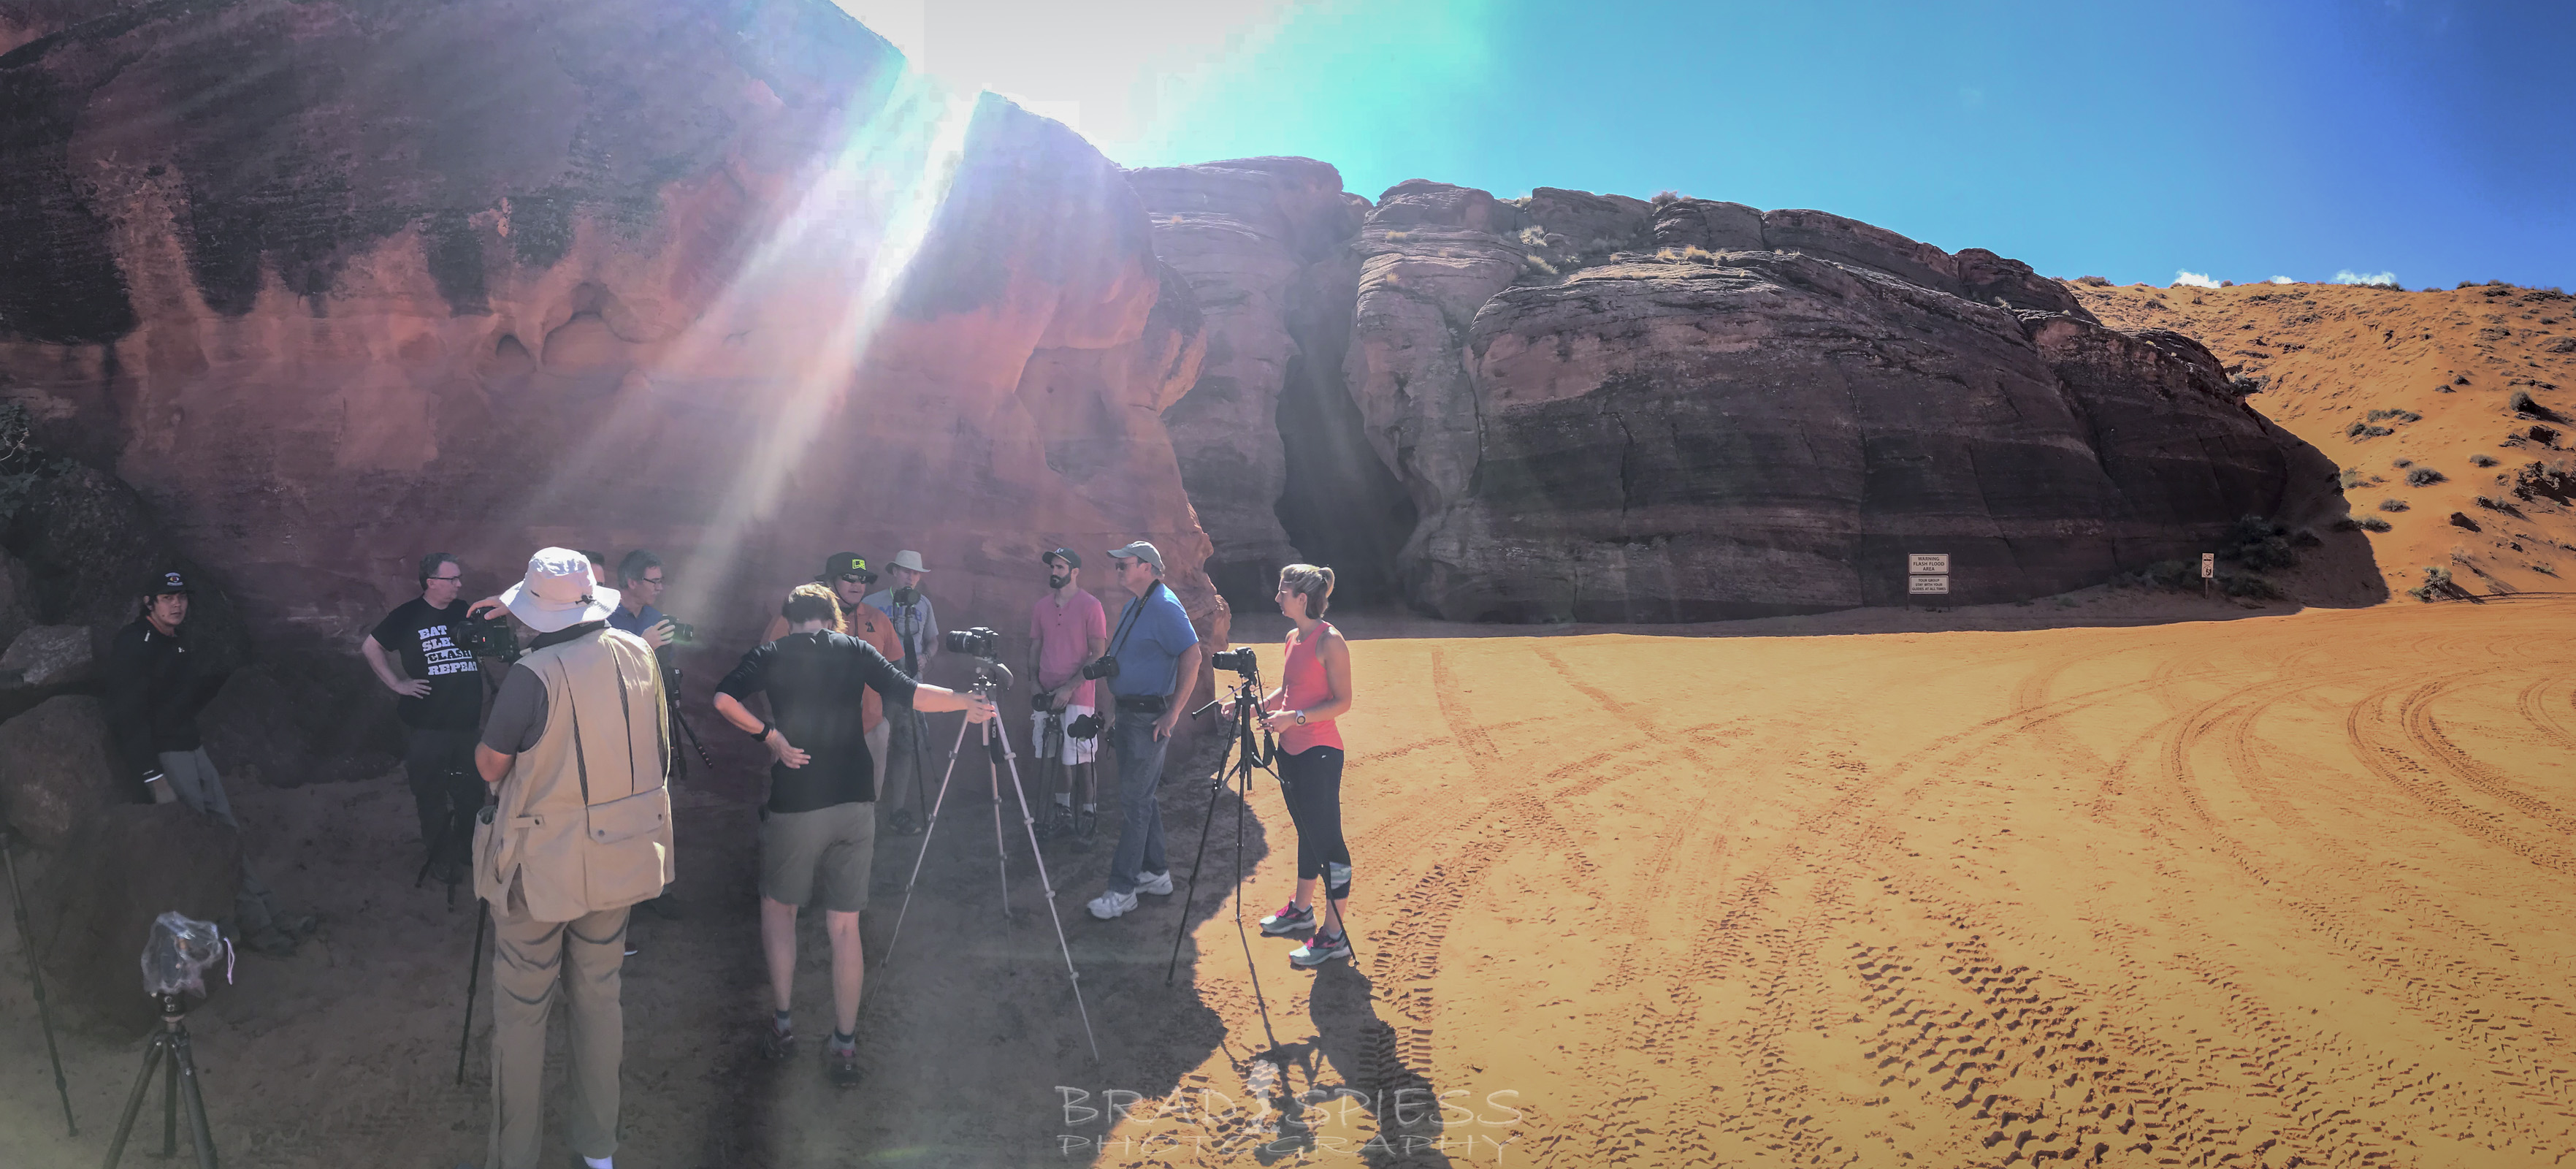 Upper Antelope Canyon Photographic Tour Group